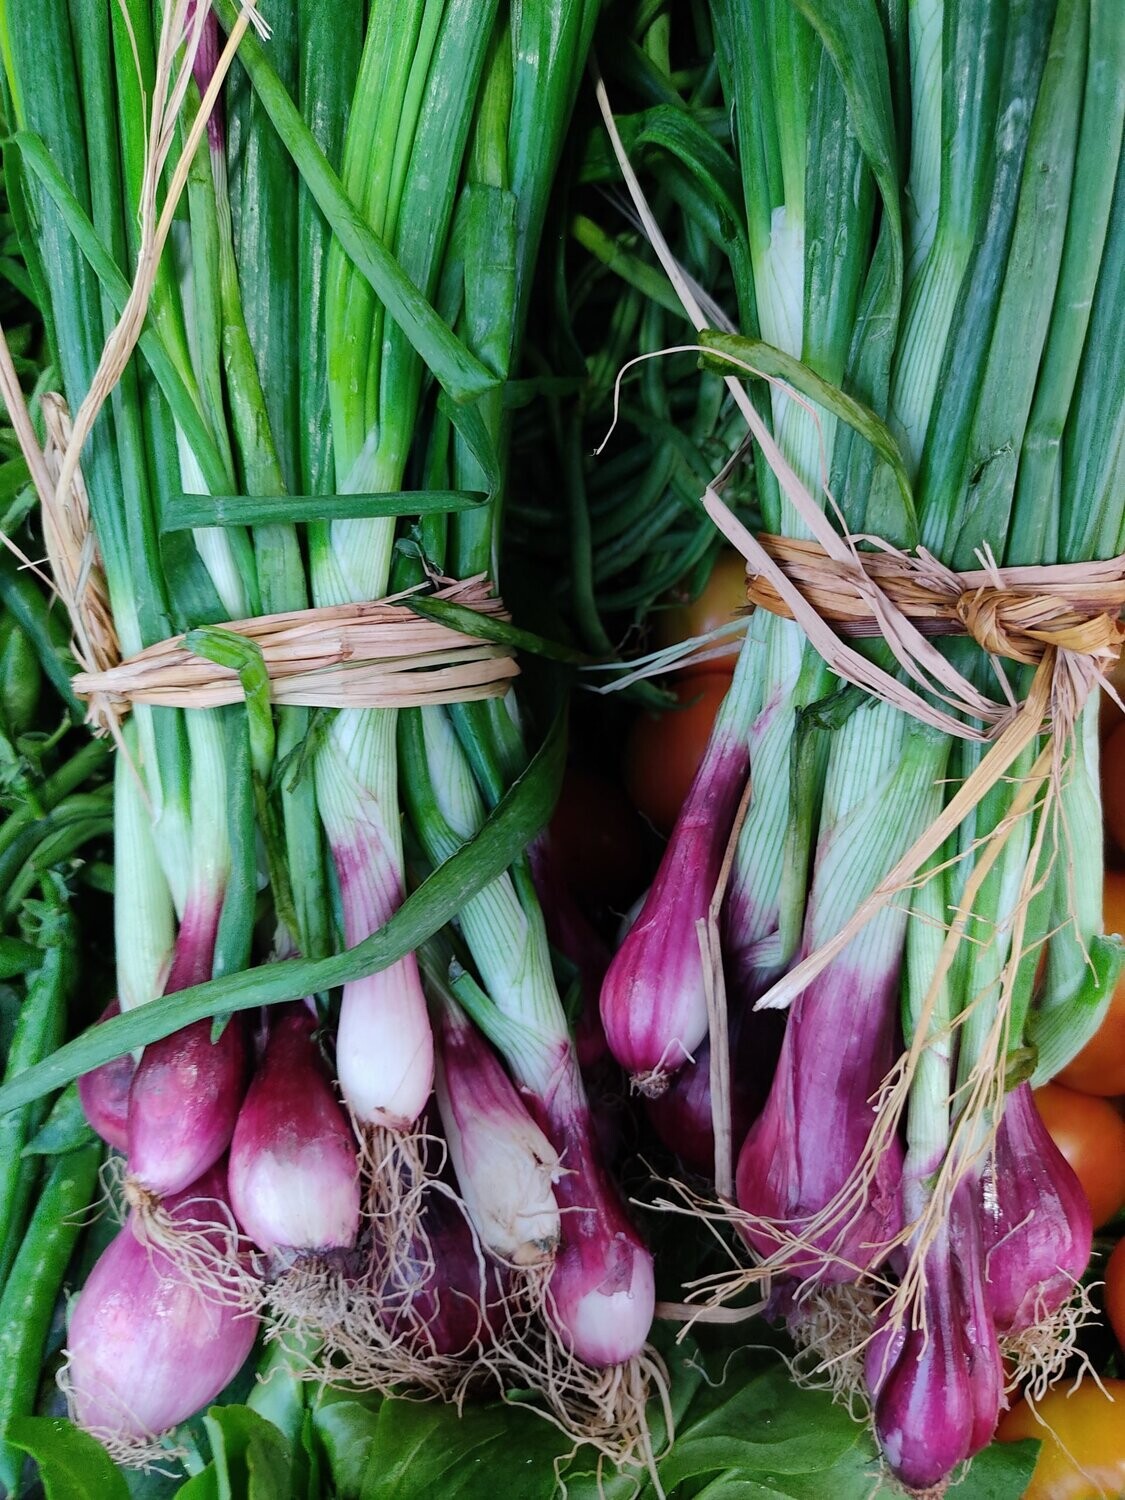 Spring onions (bunch)